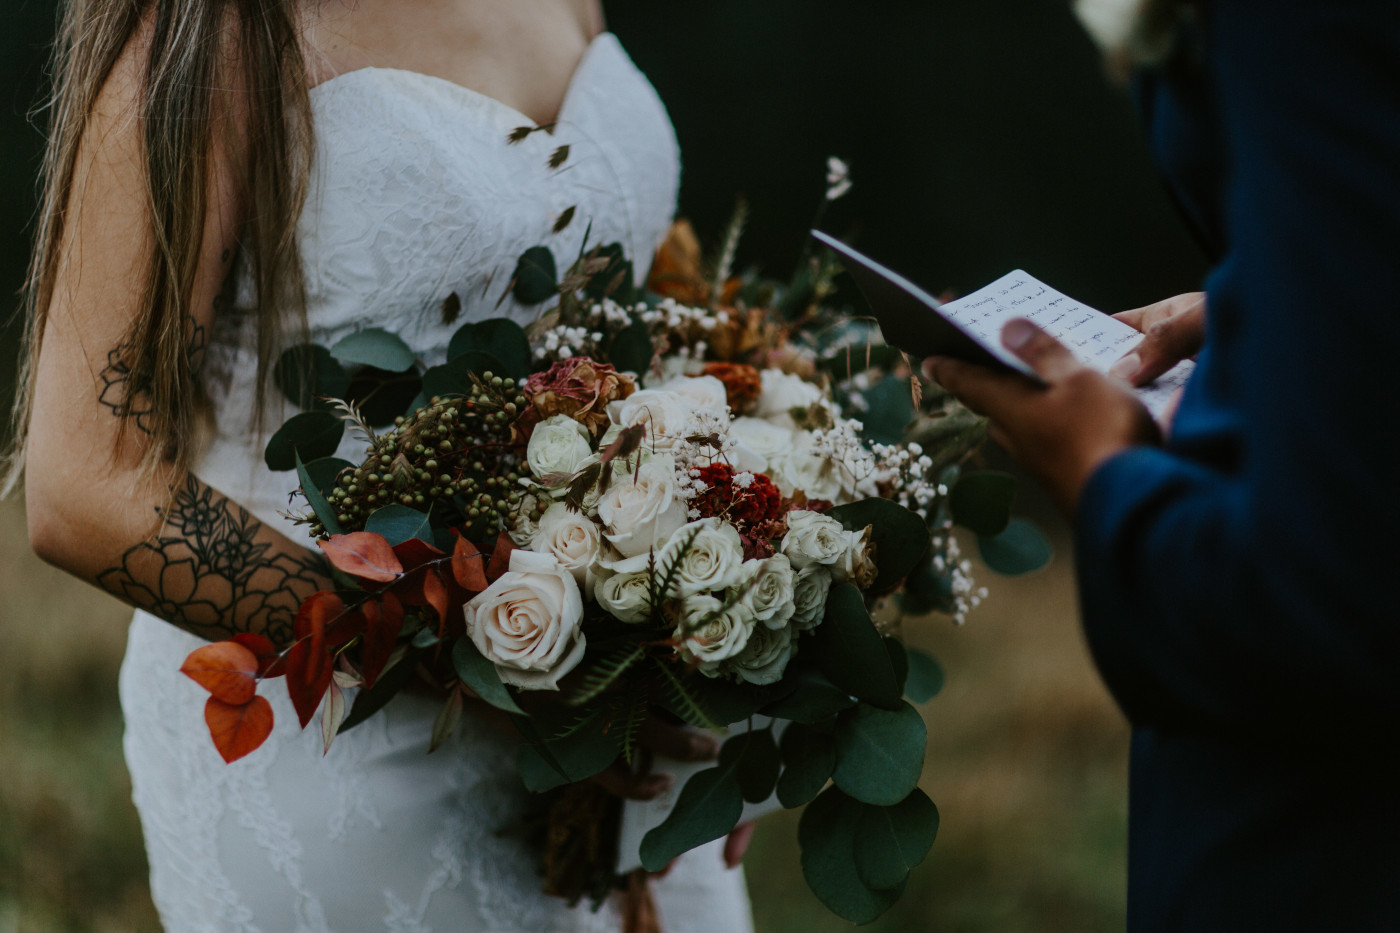 Ariana's flowers and Deandre's vow book. Elopement photography at Mount Hood by Sienna Plus Josh.